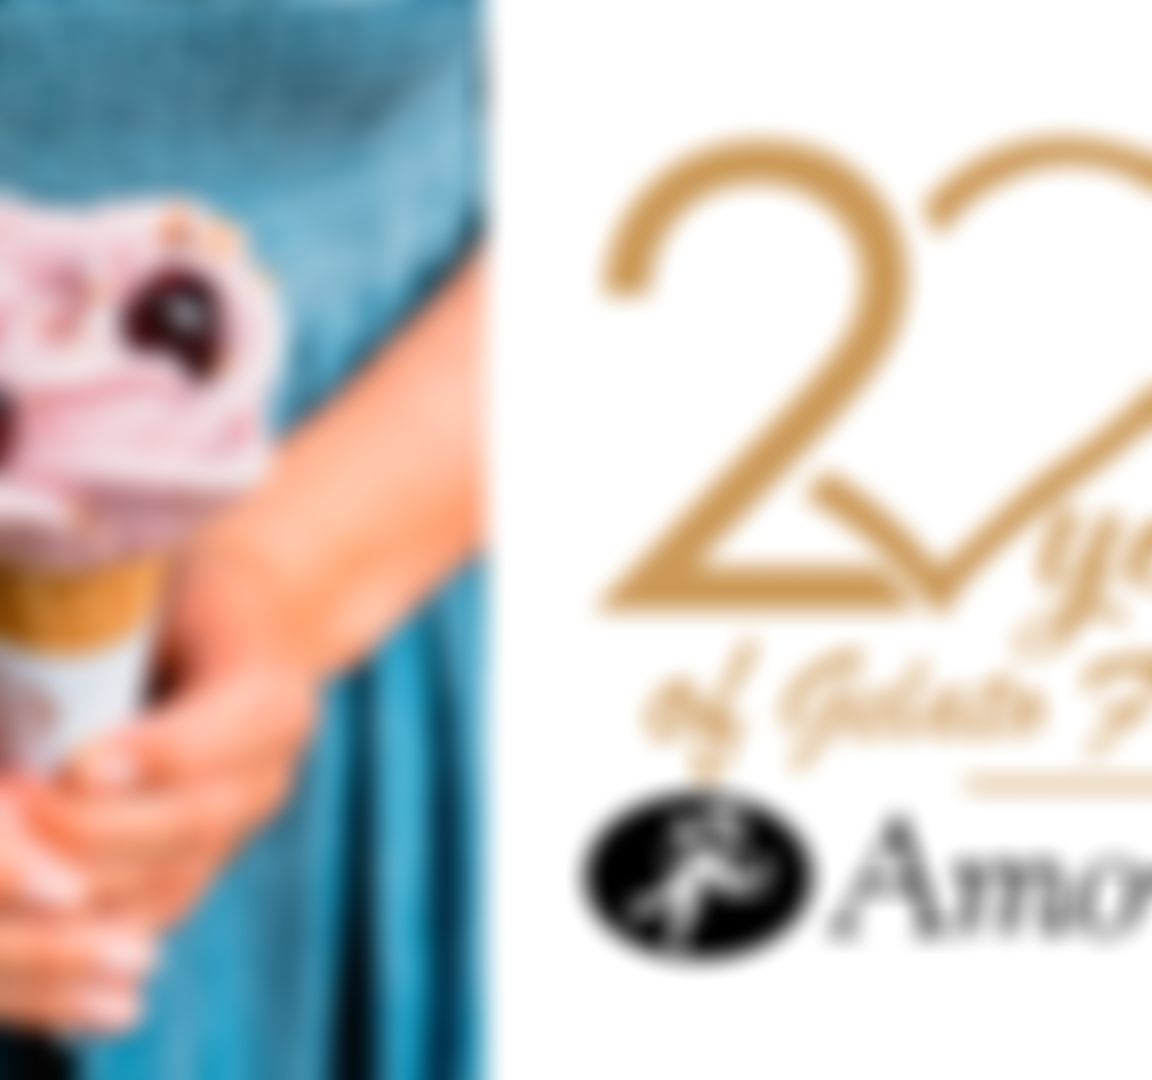 TRAVEL TO ITALY WITH AMORINO, THE ITALIAN GELATO PARLOUR IS CELEBRATING ITS 20TH ANNIVERSARY